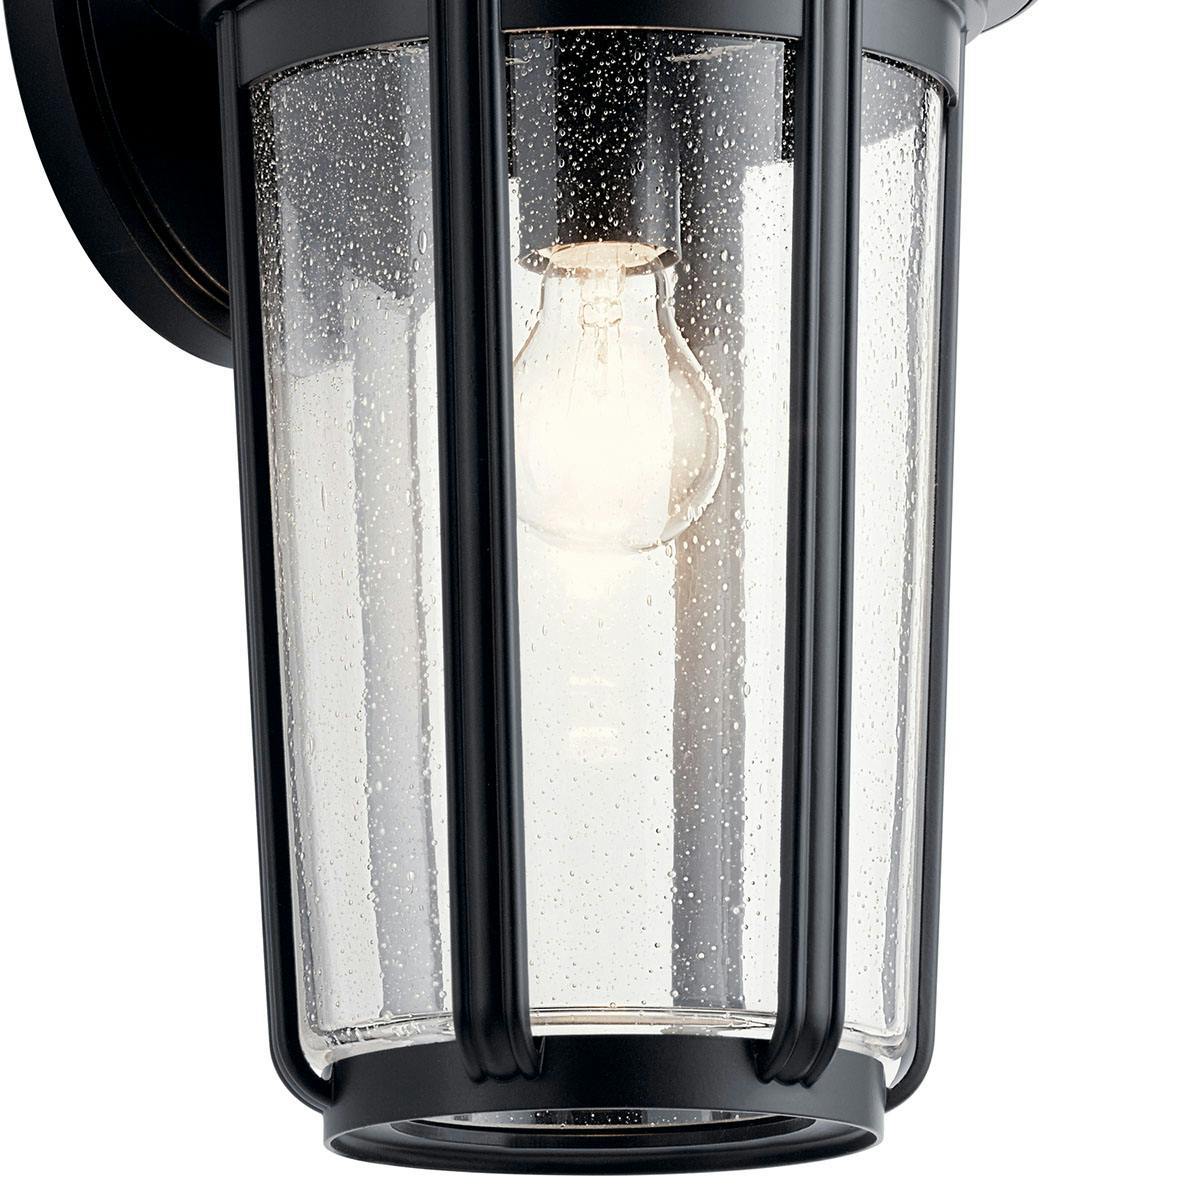 Close up view of the Fairfield 17.25" 1 Light Wall Light Black on a white background